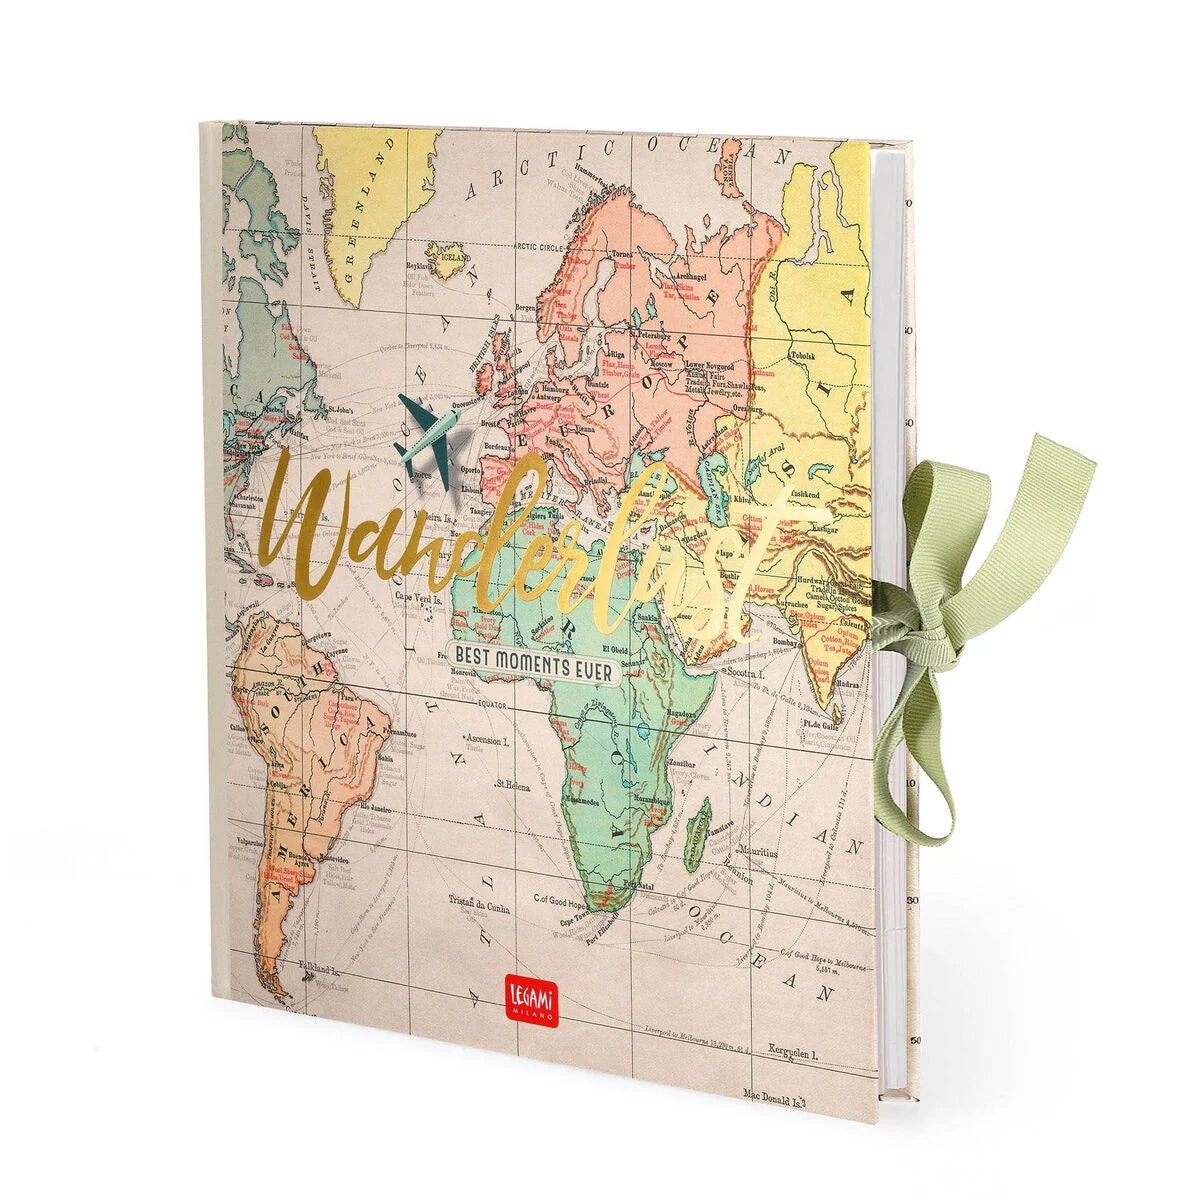 Fabulous Gifts Quirky Gifts Legami Photo Album Travel by Weirs of Baggot Street